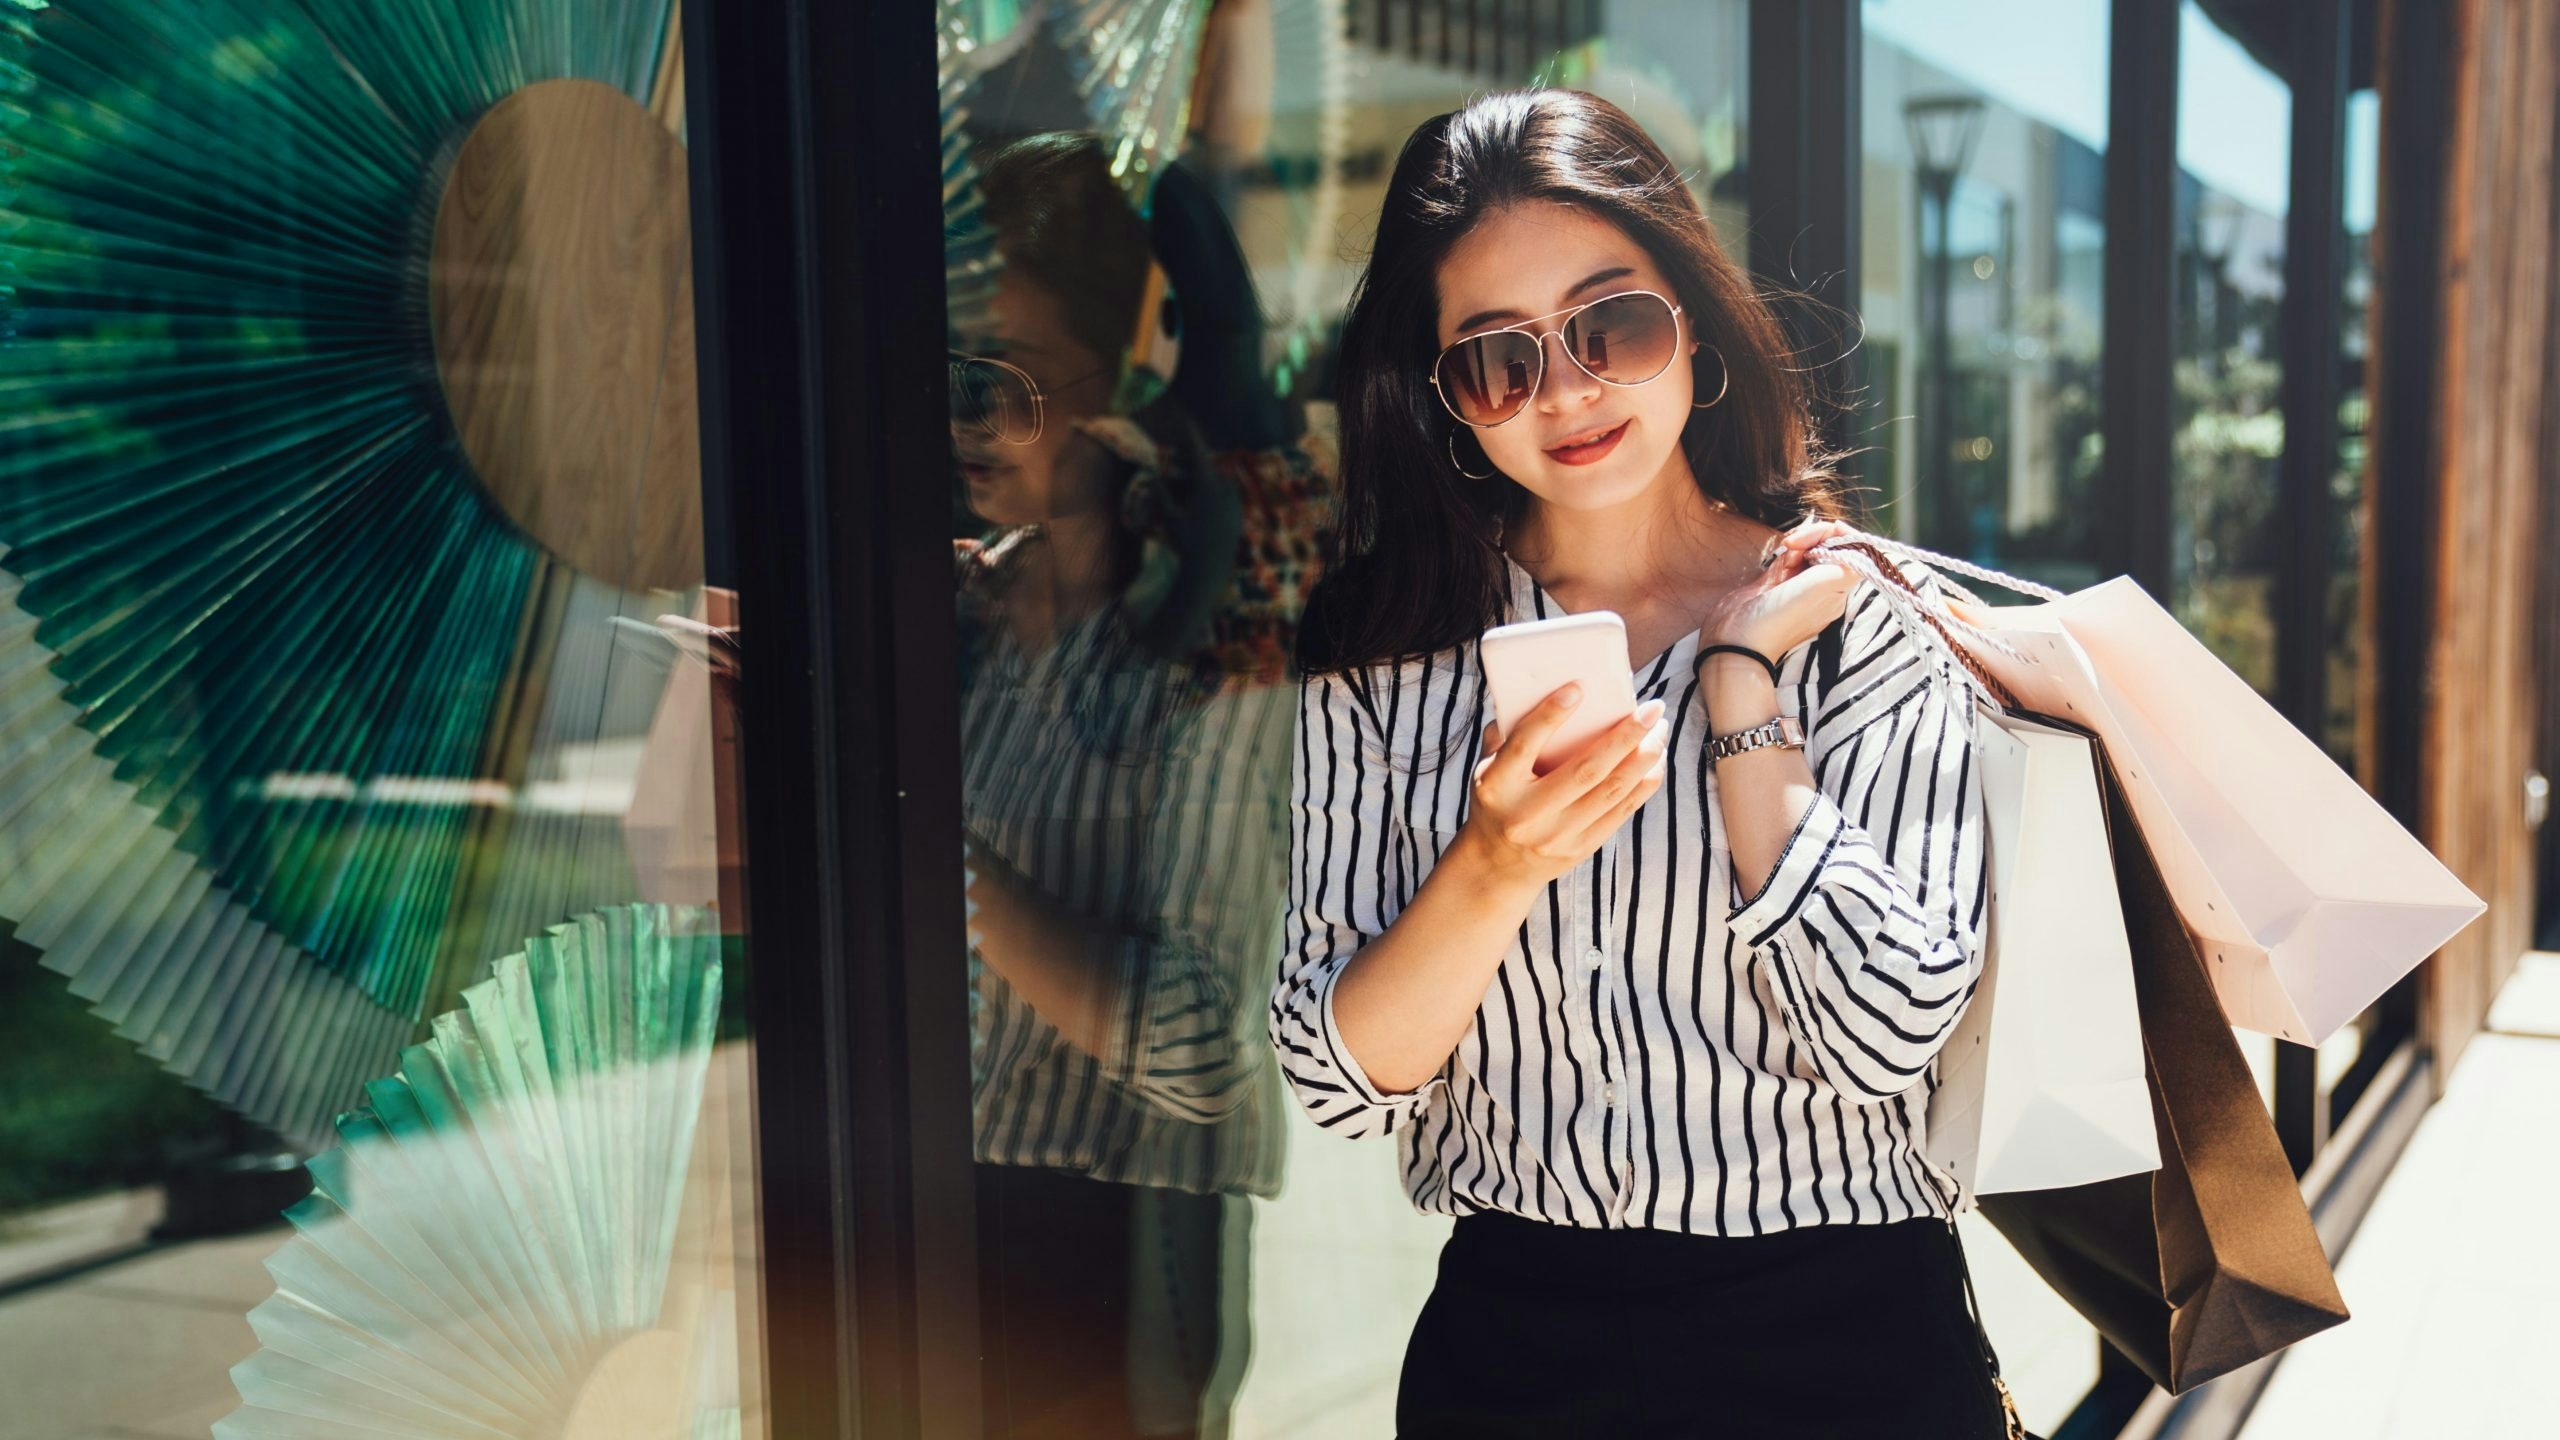 Most surveyed global consumers intend to reduce their consumption in the next six months. China’s luxury market is set to buck that trend. Photo: Shutterstock